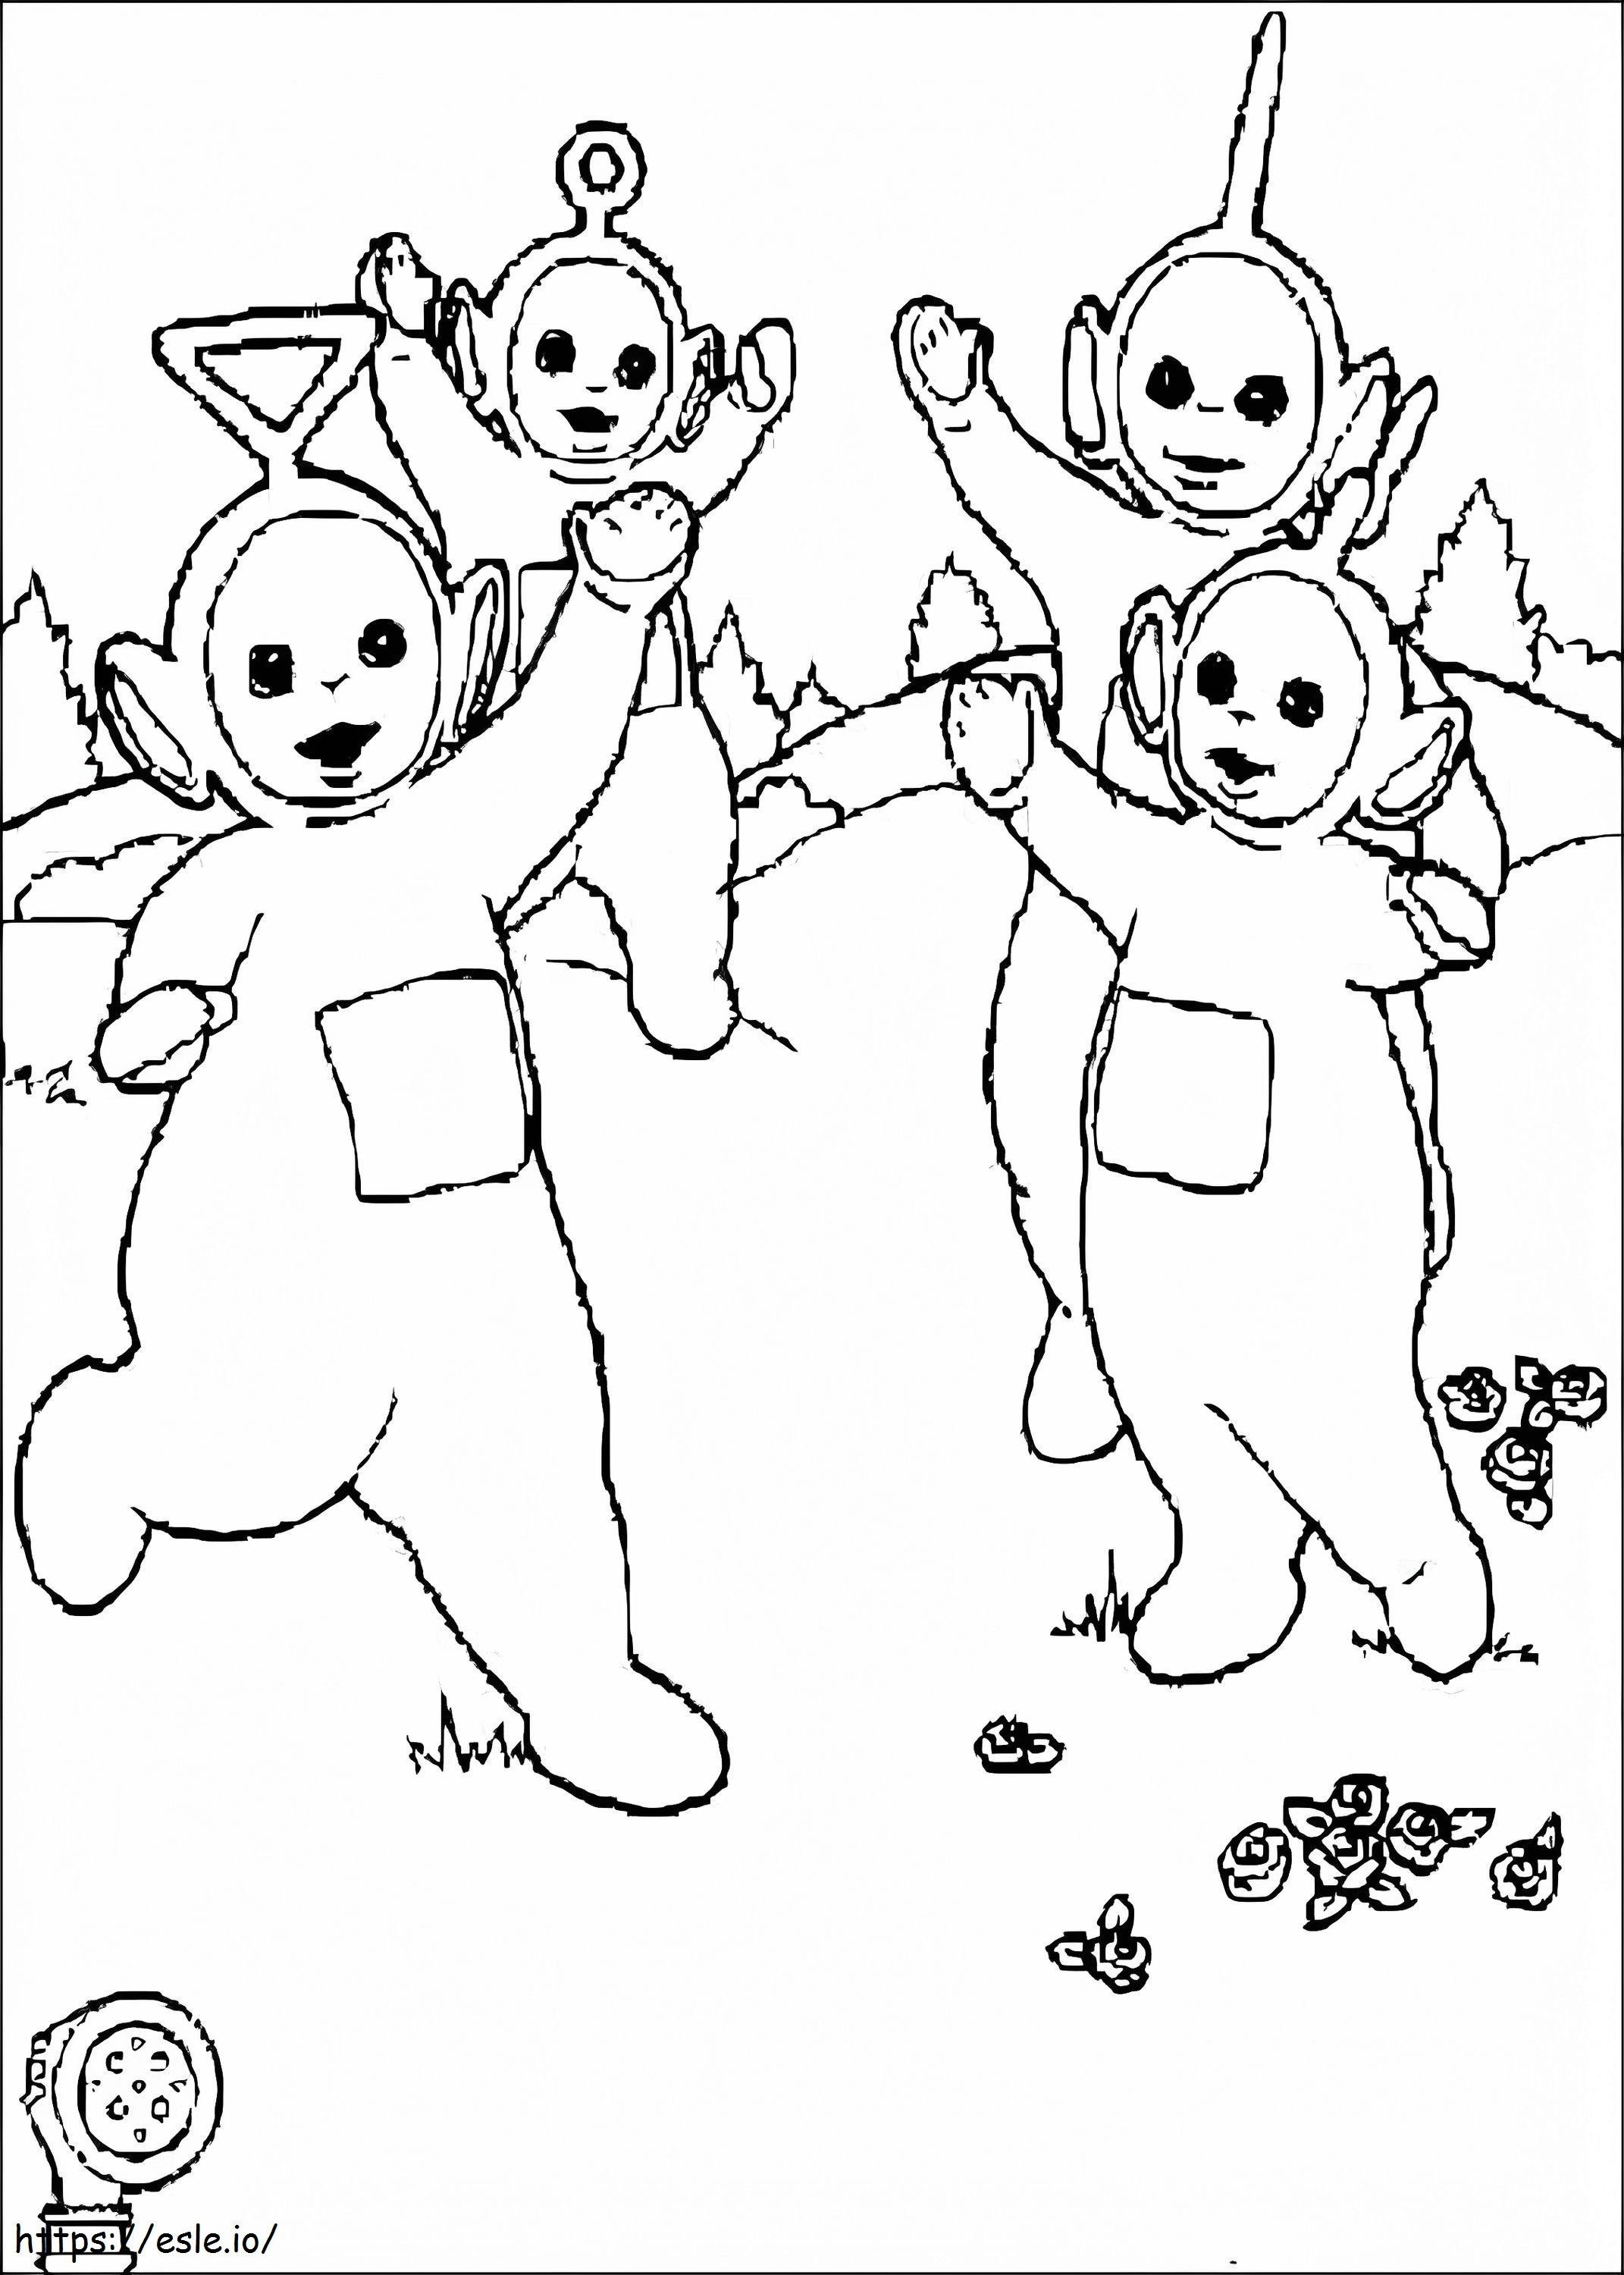 Happy Teletubbies Coloring Page coloring page